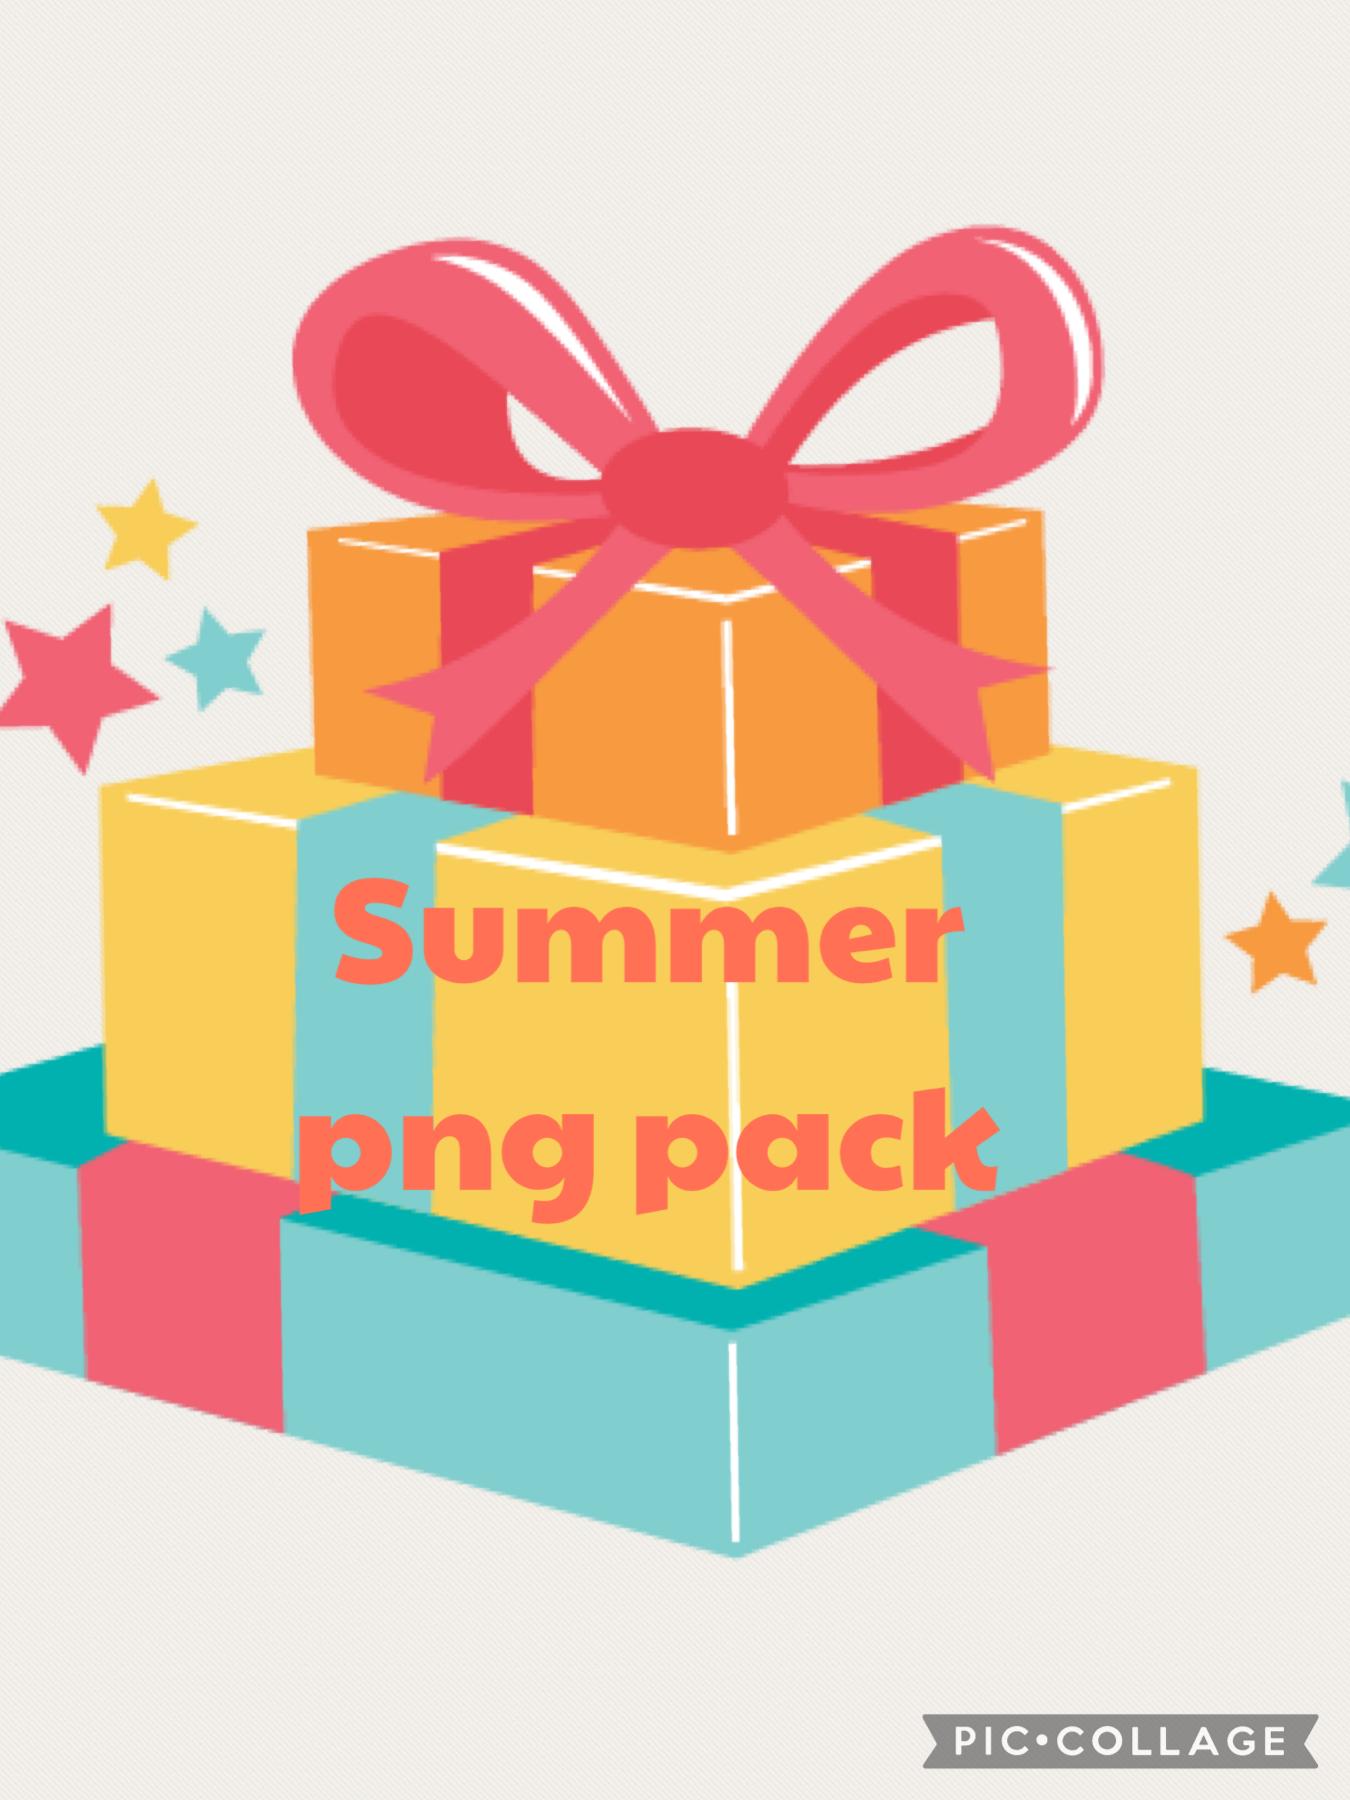 It’s summer! So here’s a png pack! Hope you like it! Adiós.